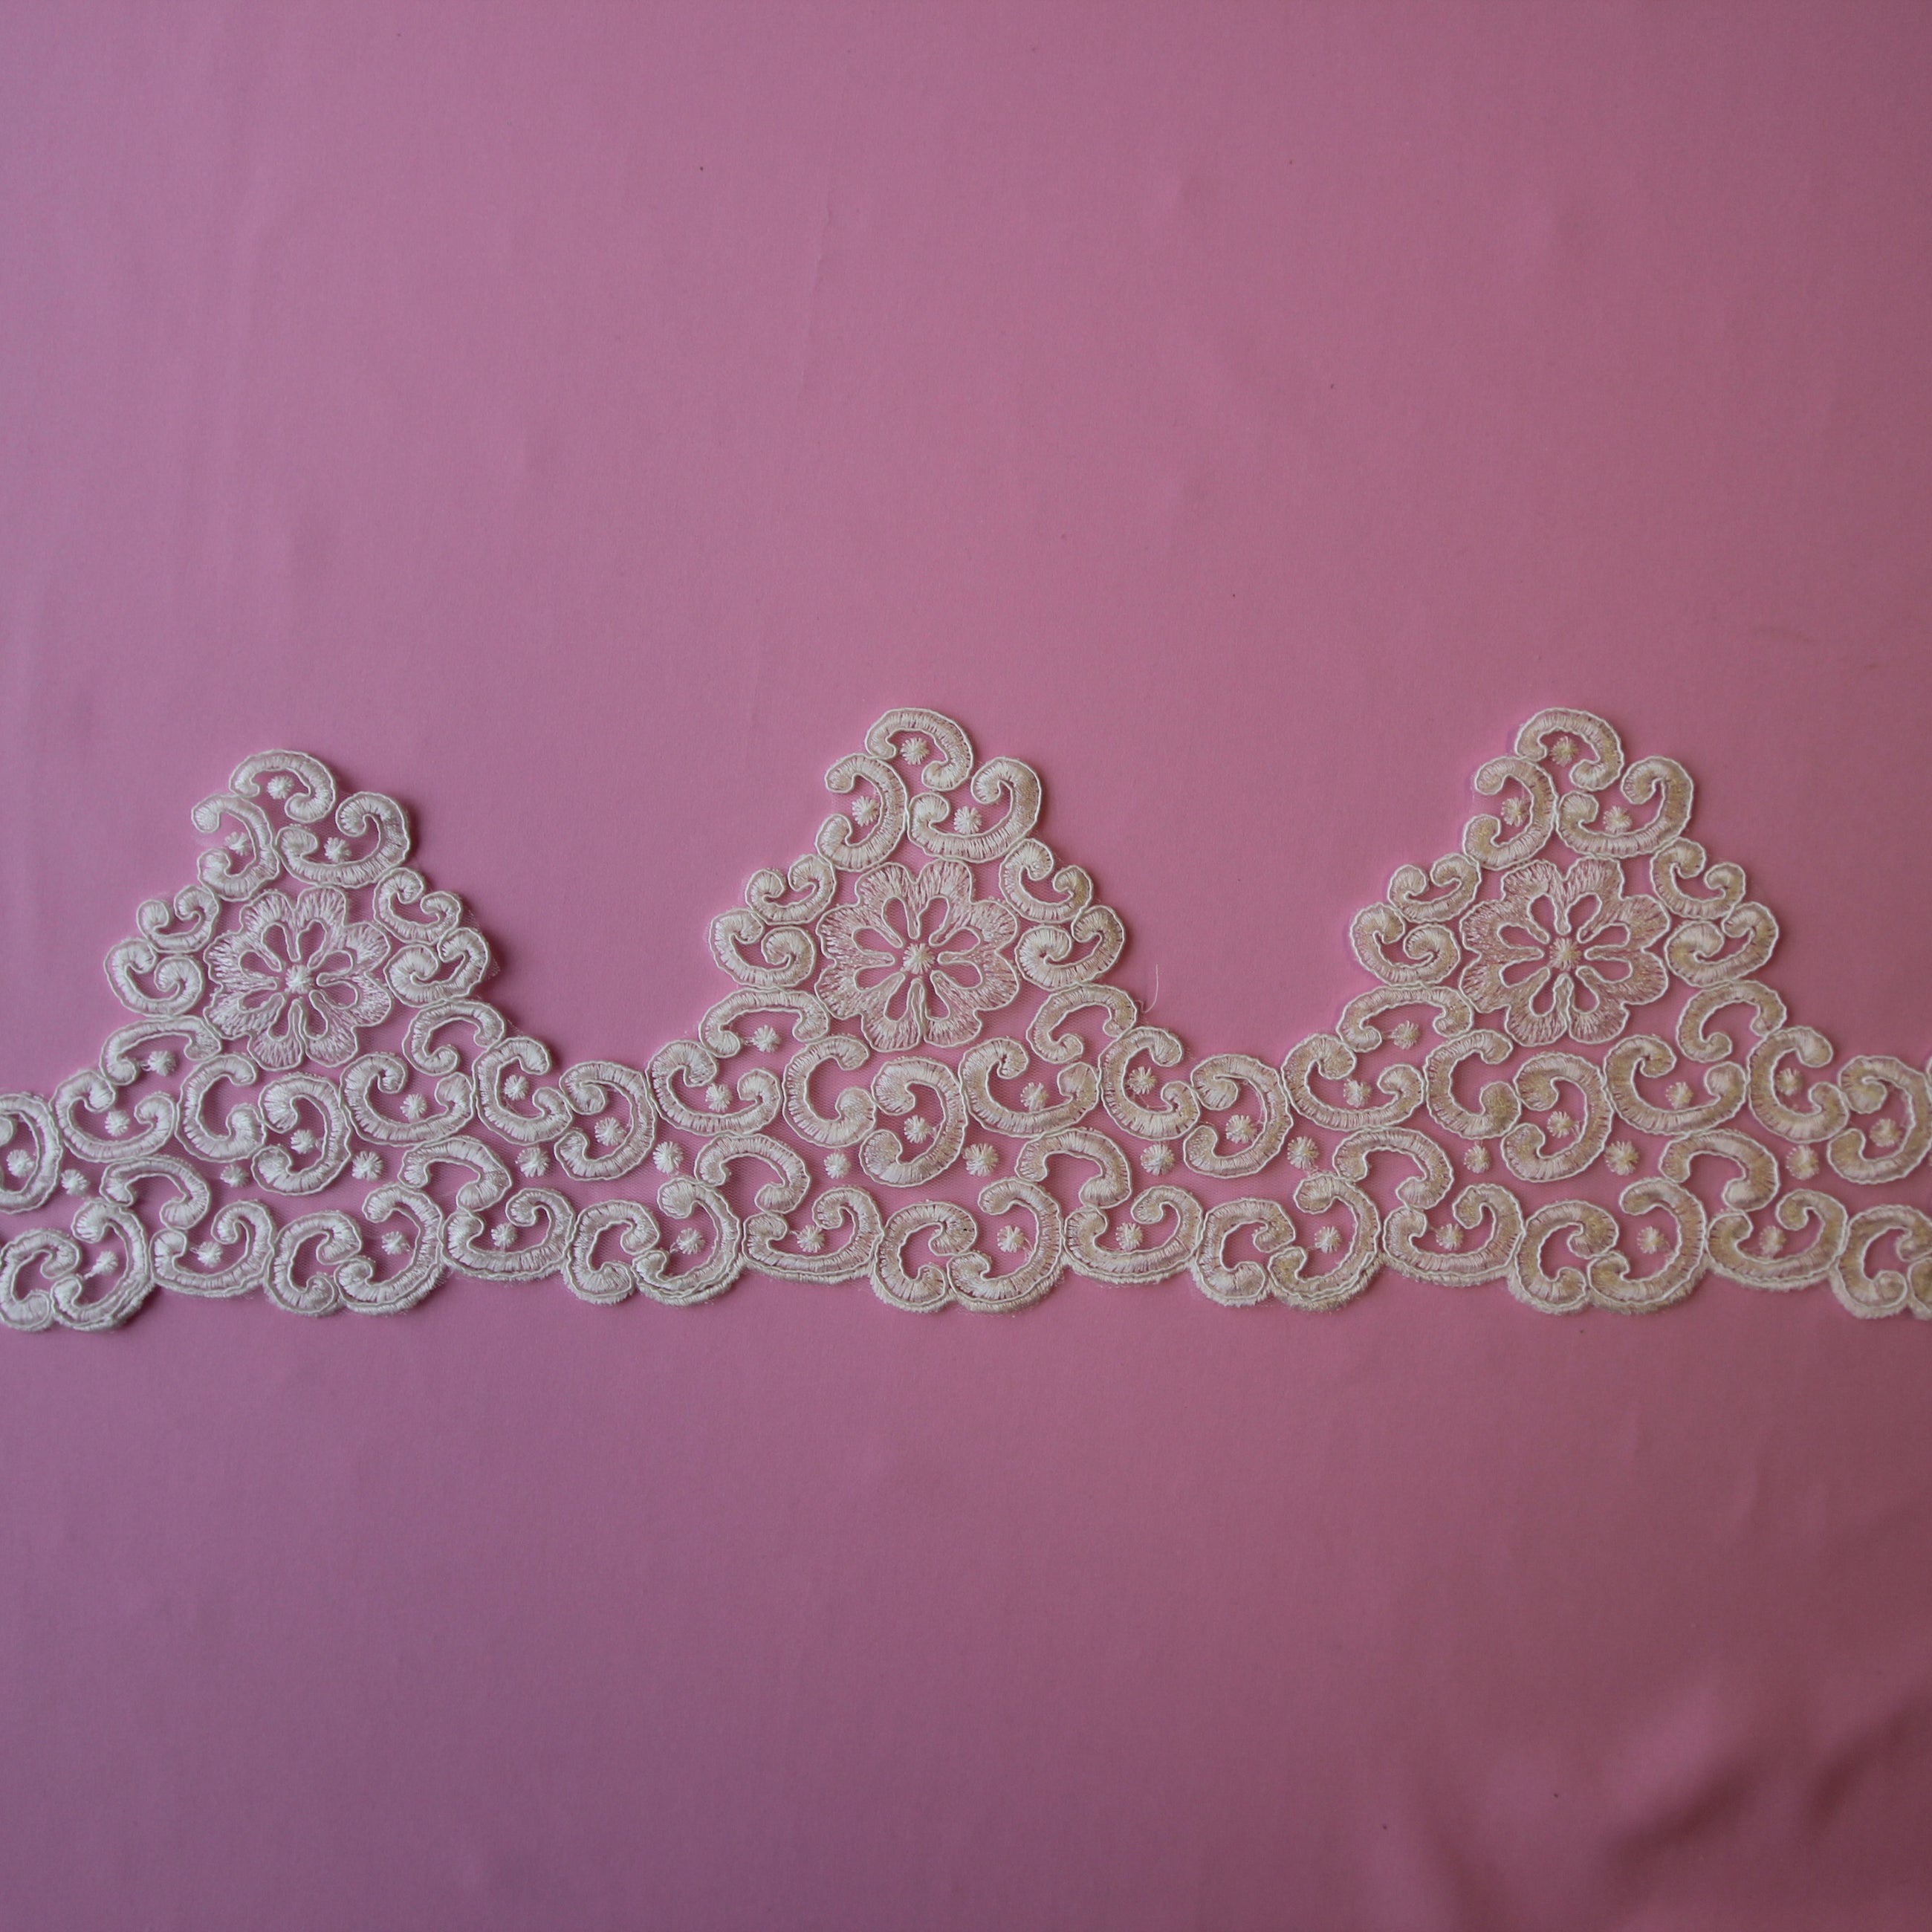 Embroidered Trim on Tulle